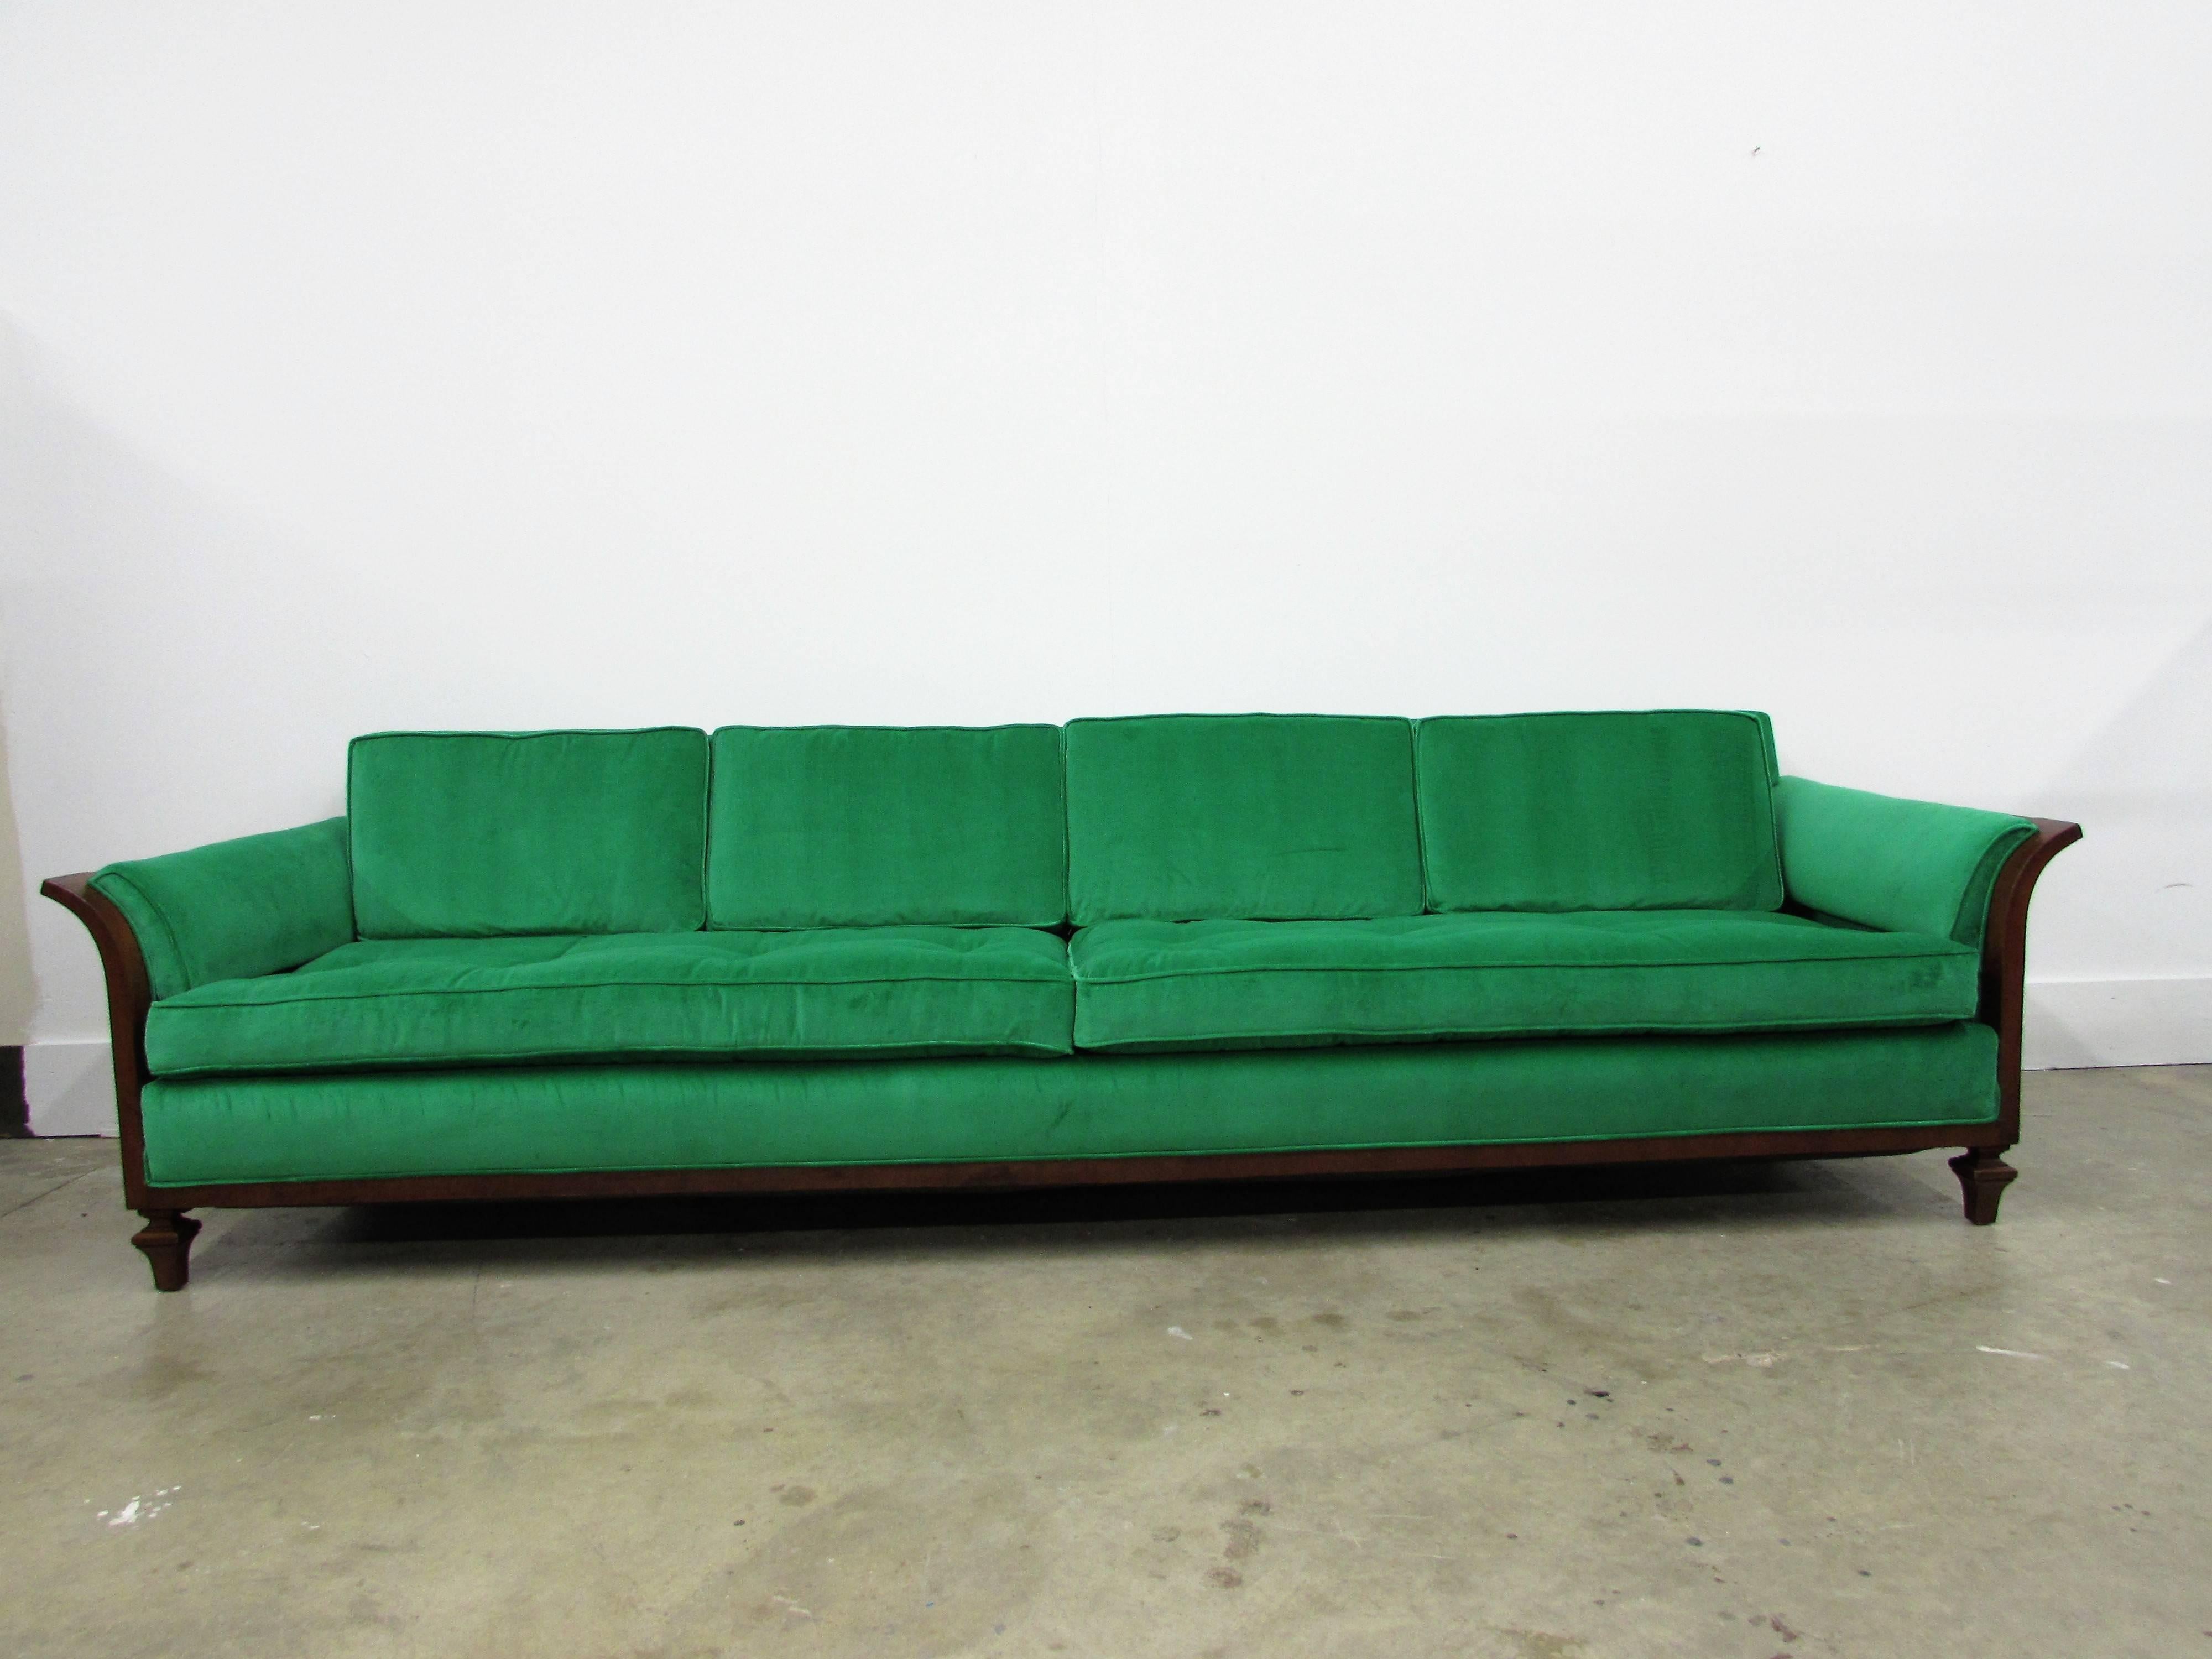 Walnut wrapped sofa by Tomlinson is this sophisticated and stylish Mid-Century Modern design, it has flared walnut sides, edges and ending in carved feet with newly reupholstered Kelly green velvet fabric with four top cushions and cording on all